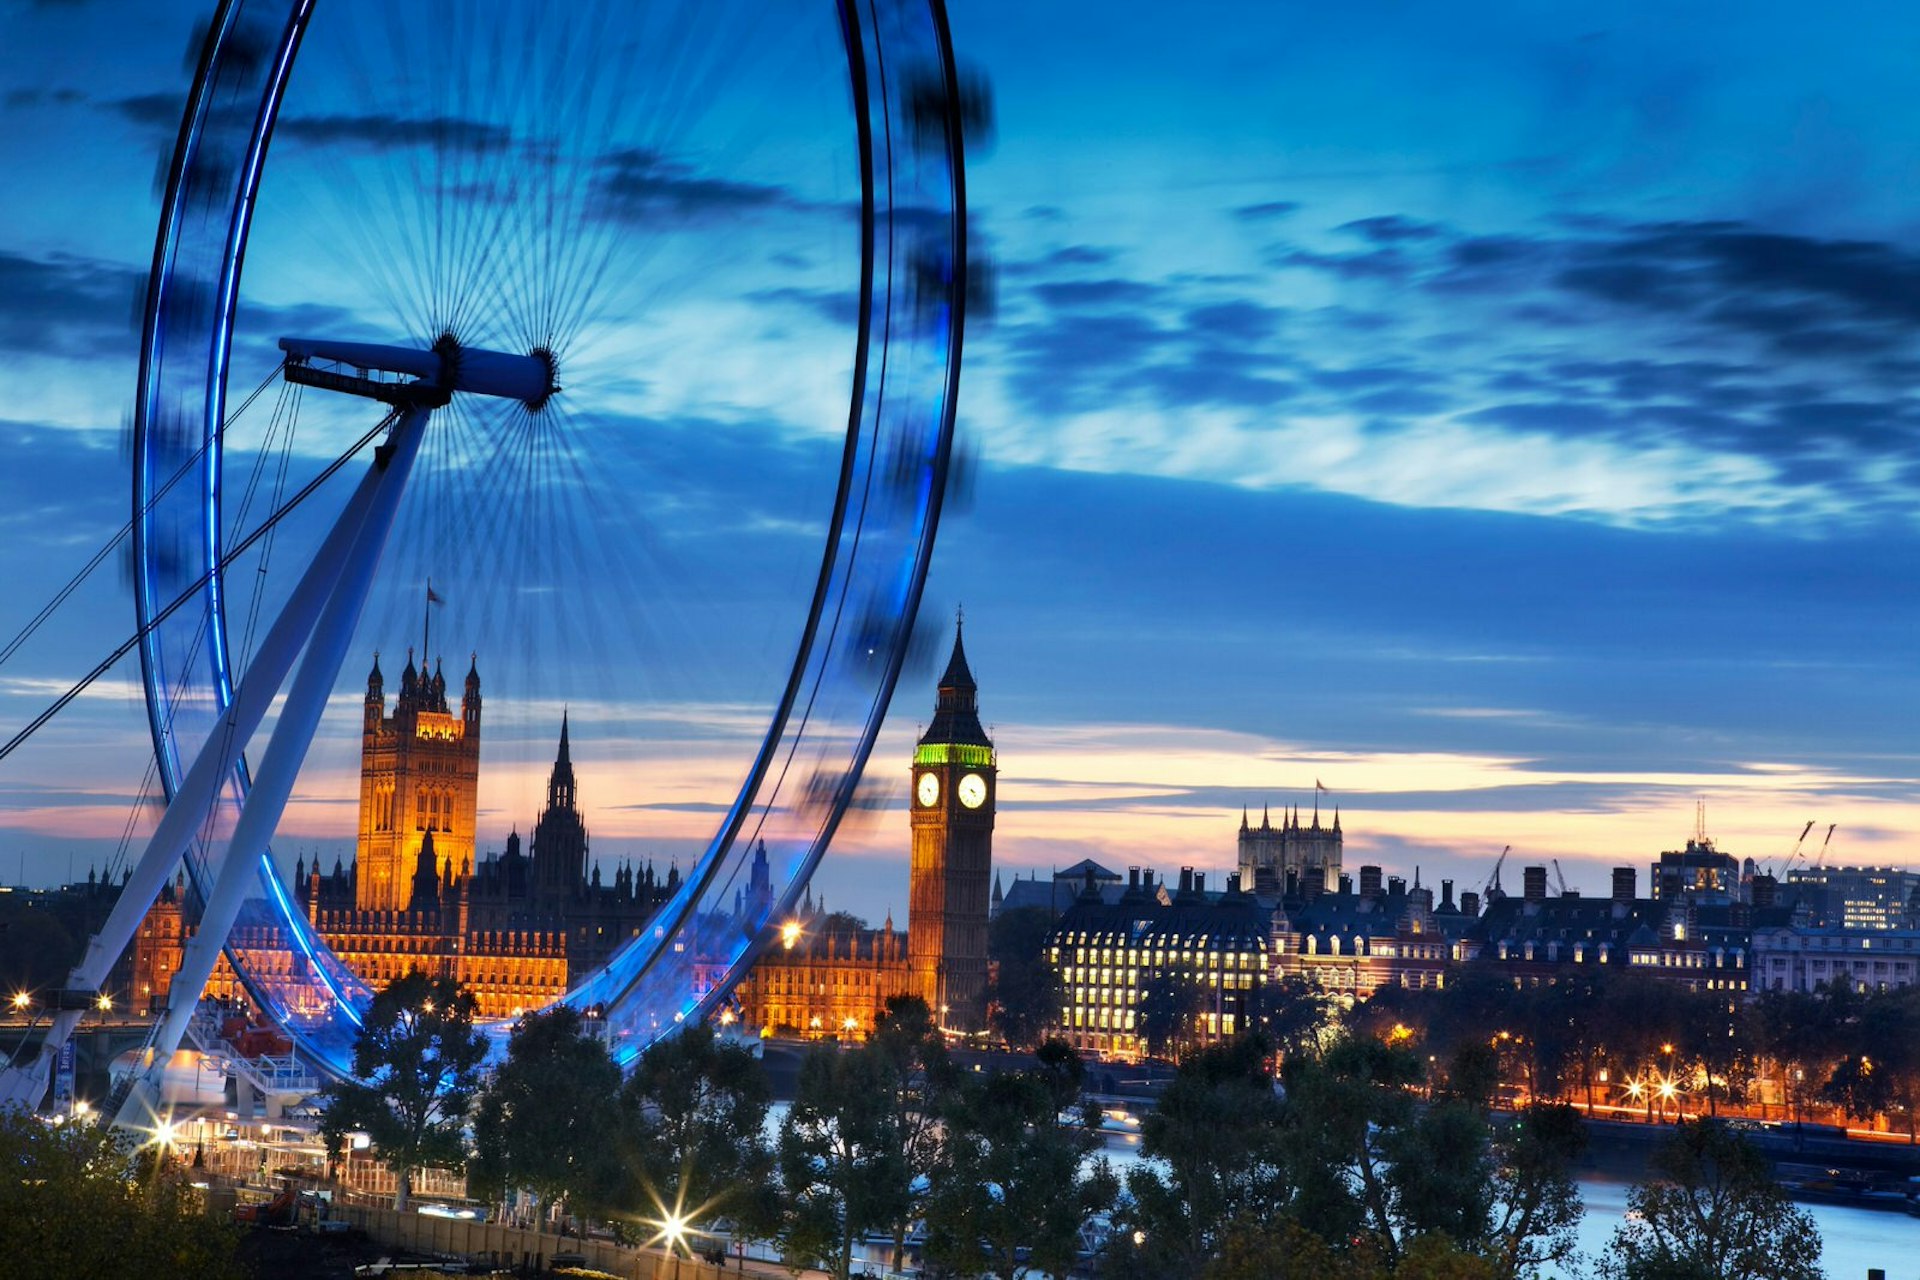 London Eye and Houses of Parliament at dusk